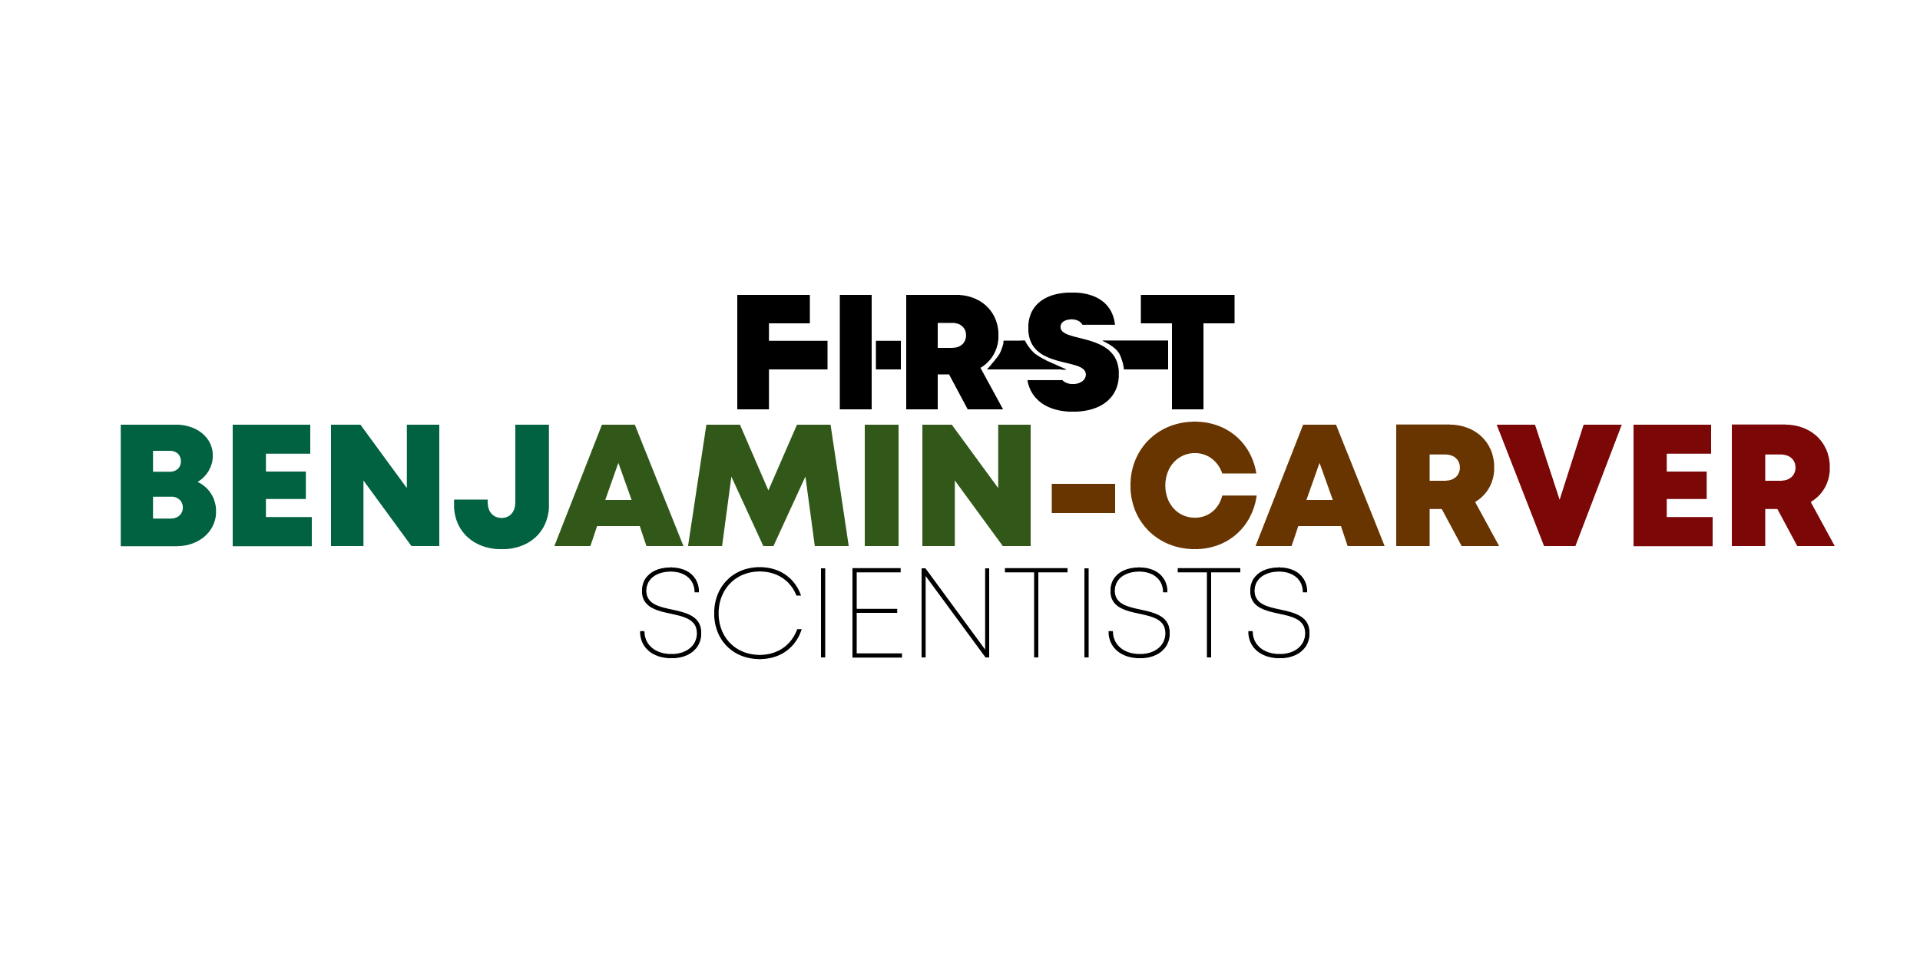 FIRST Benjamin Carver Scientists logo with a gradient in the letters that make up Benjamin-Carver that fades from UAB green to Tuskegee crimson